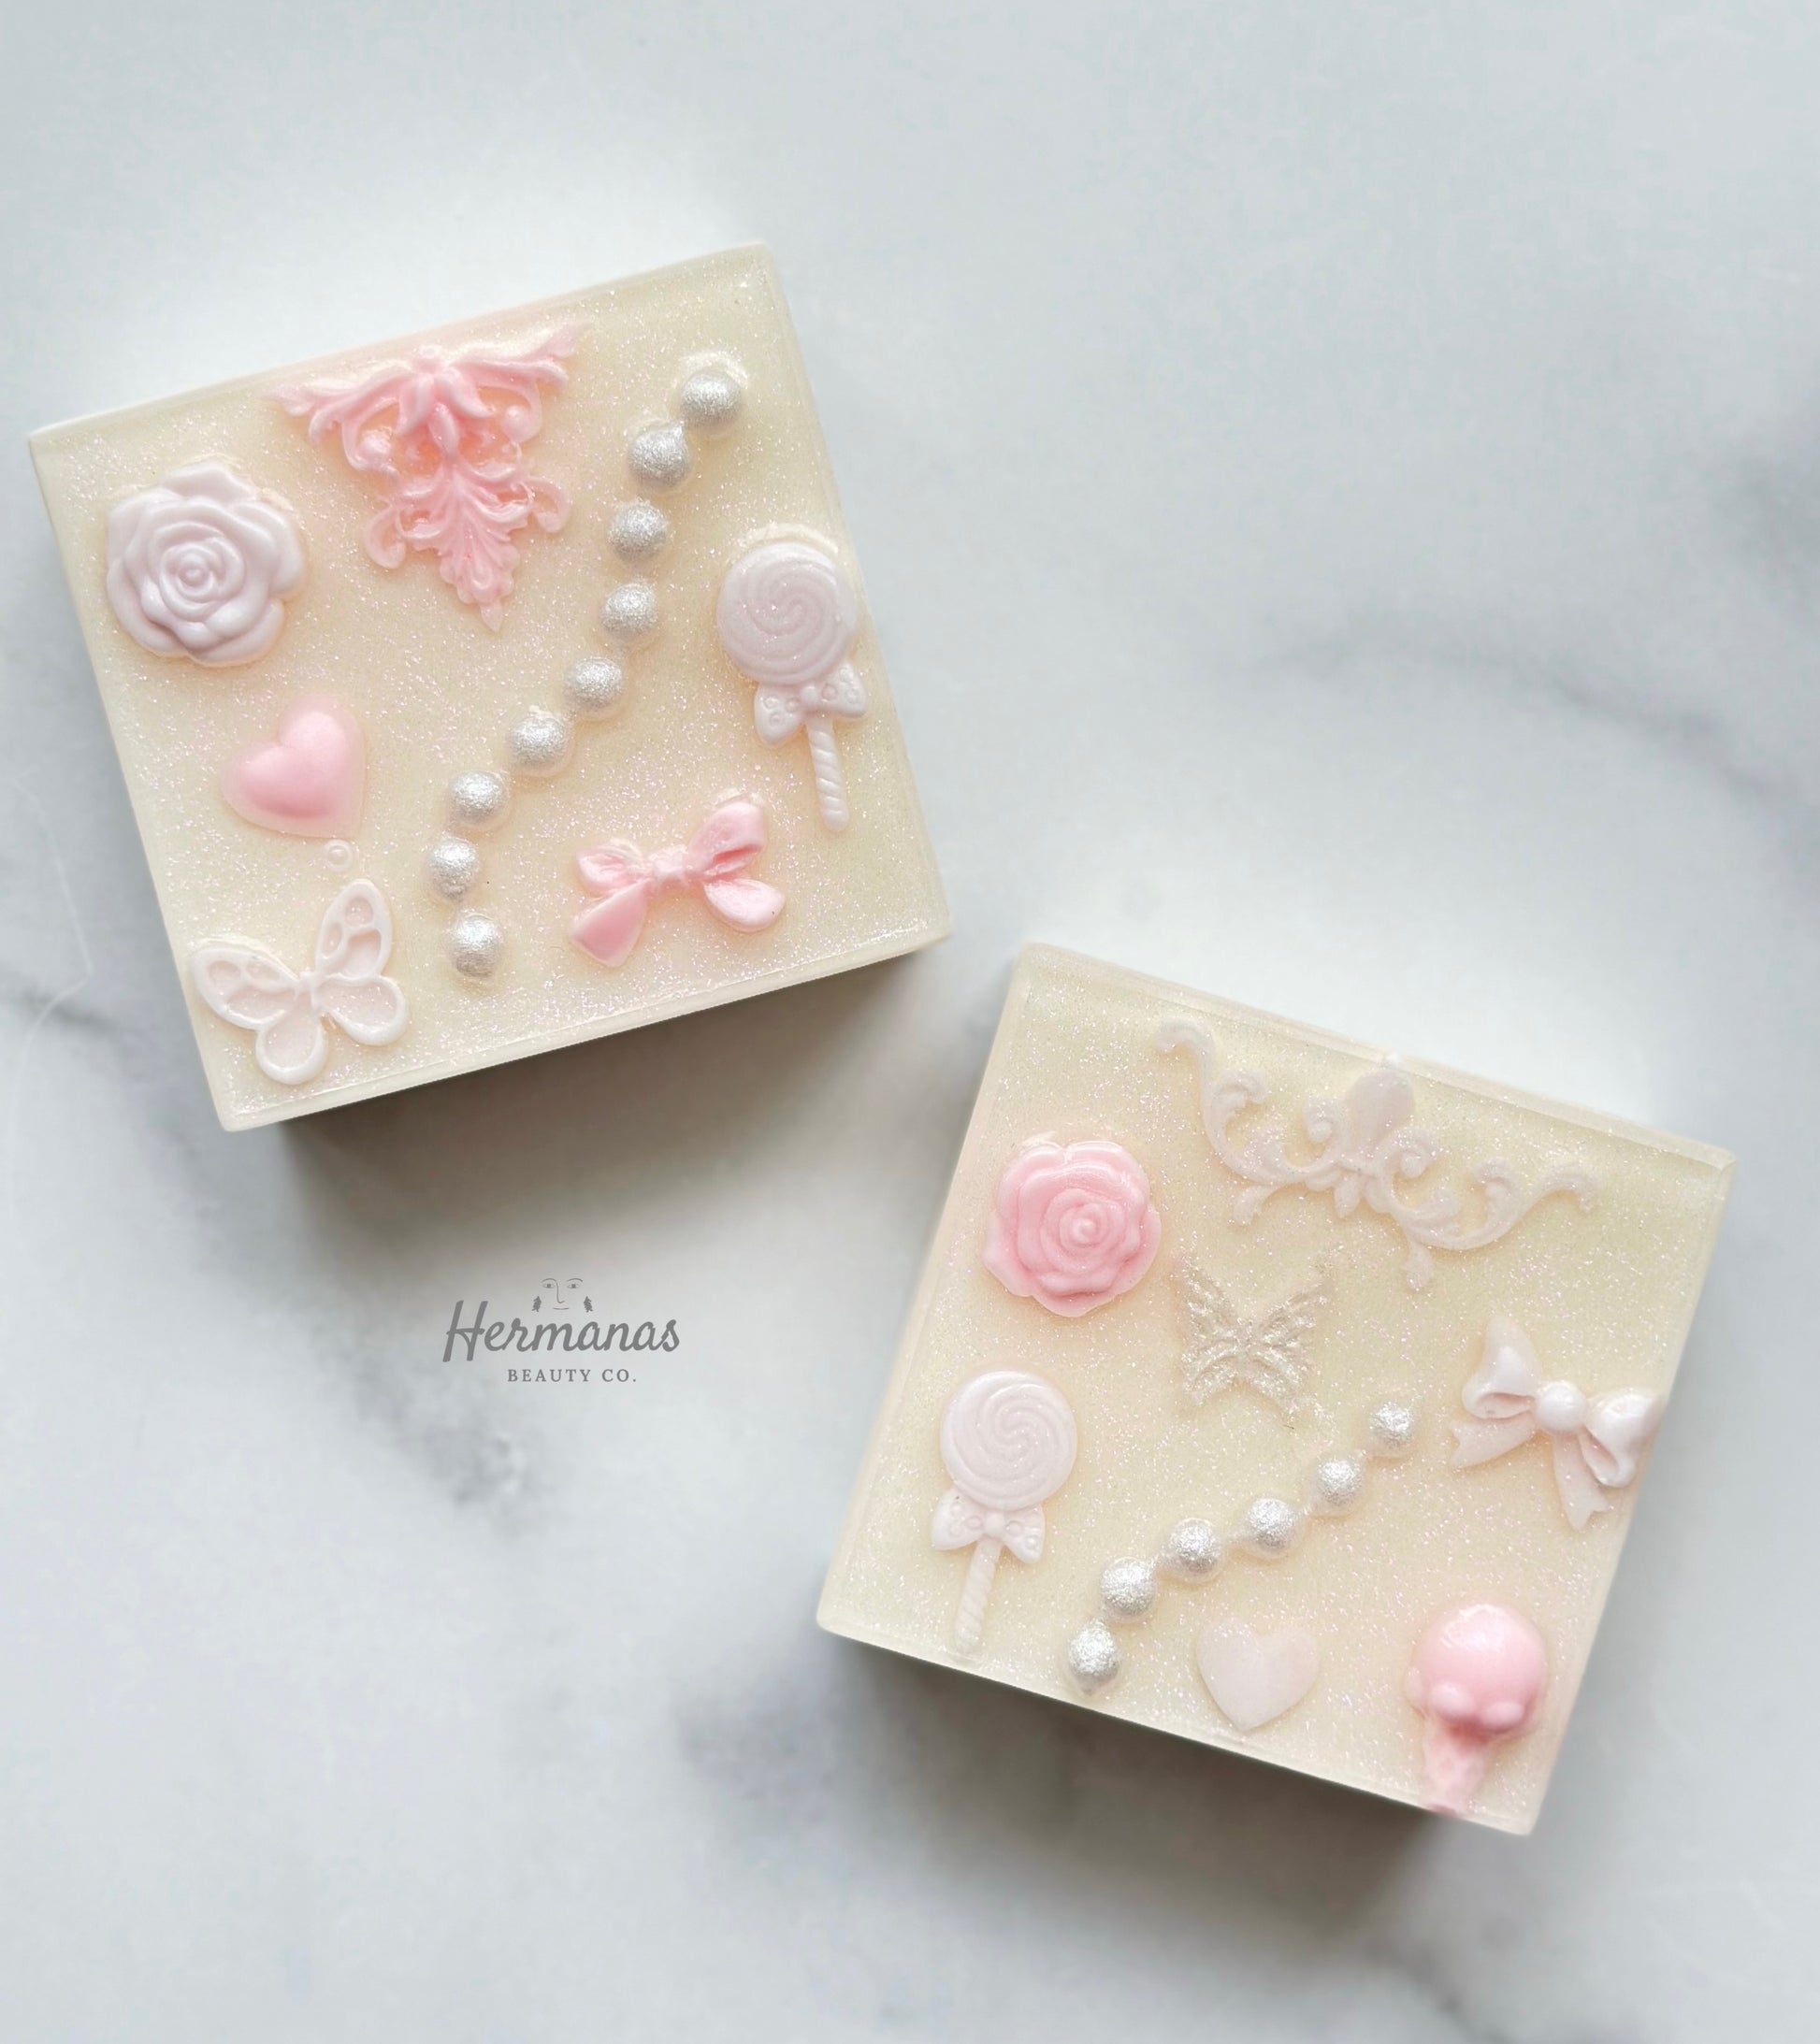 Soap with lace, pearls, bows, butterflies and roses in pastel colors